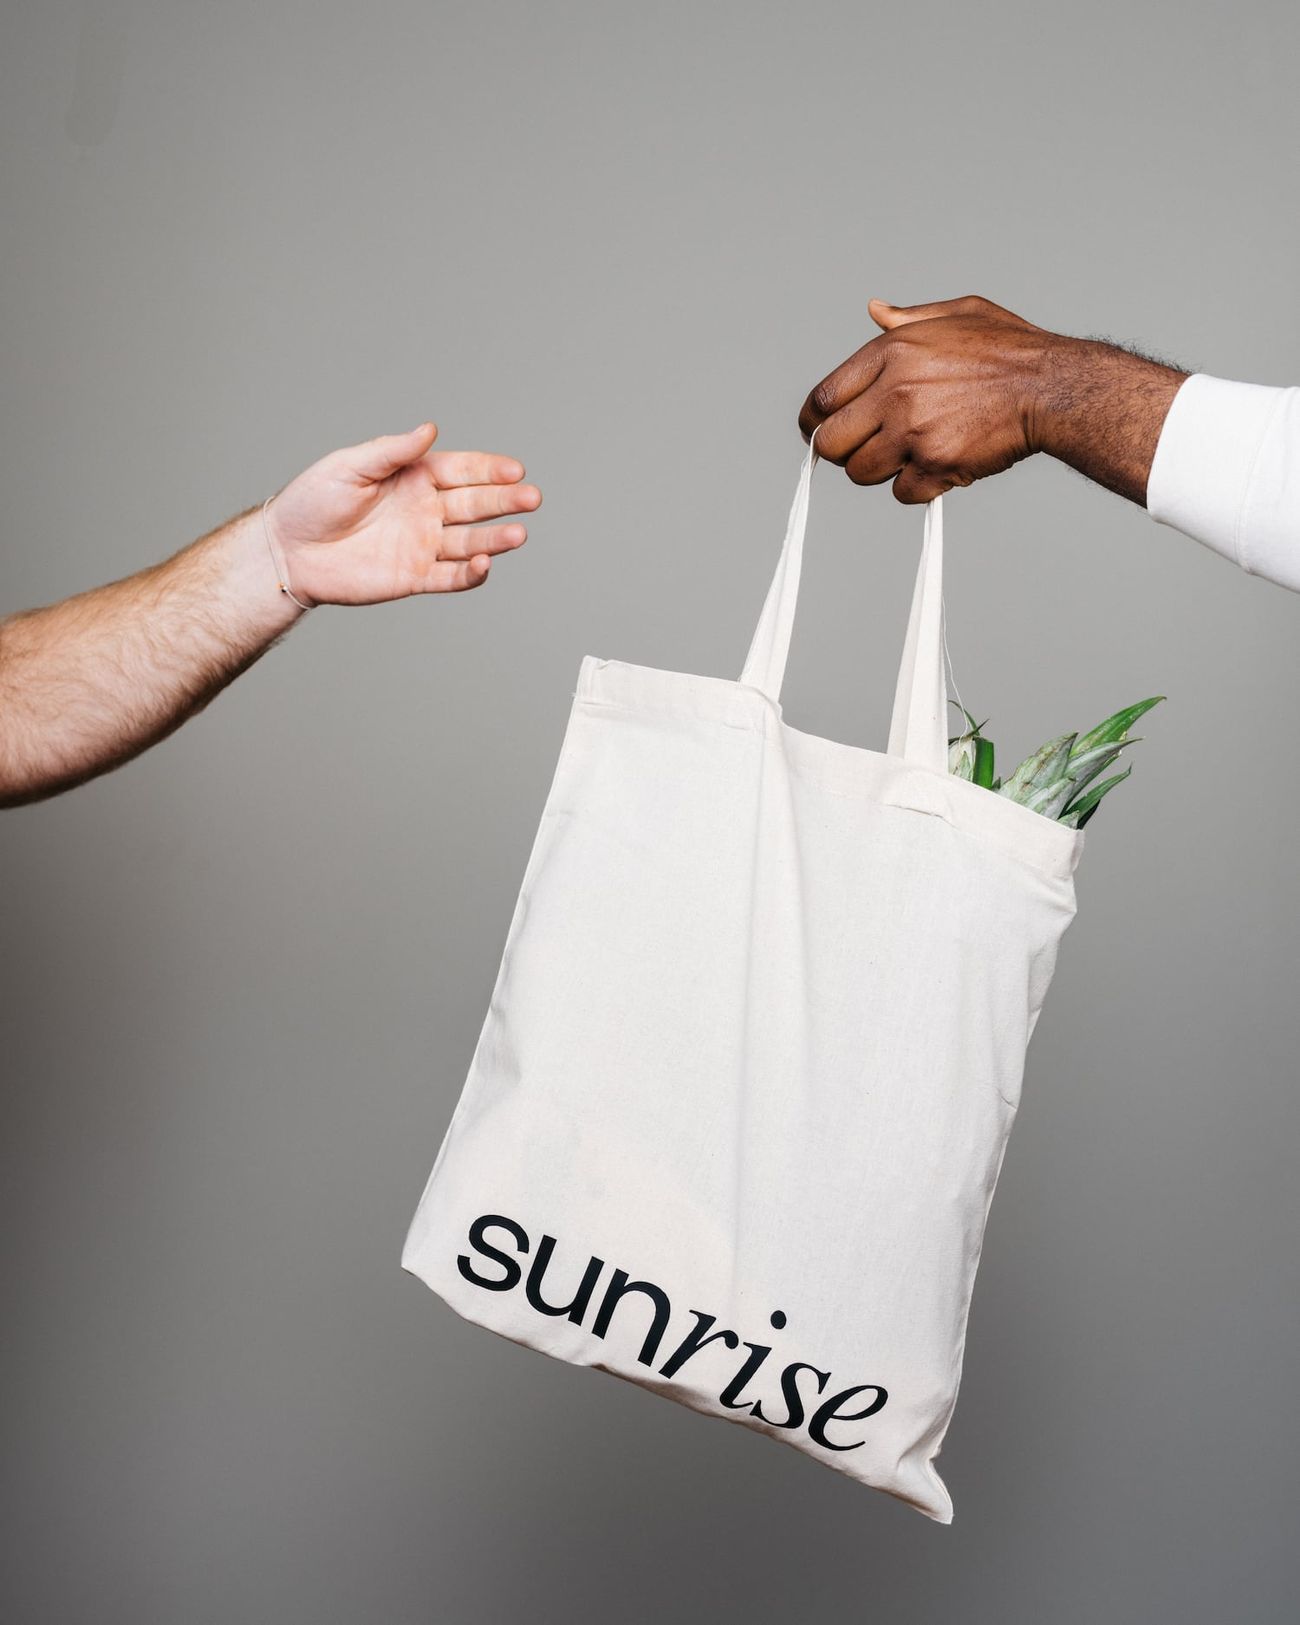 A Sunrise grocery bag handed from one person to another